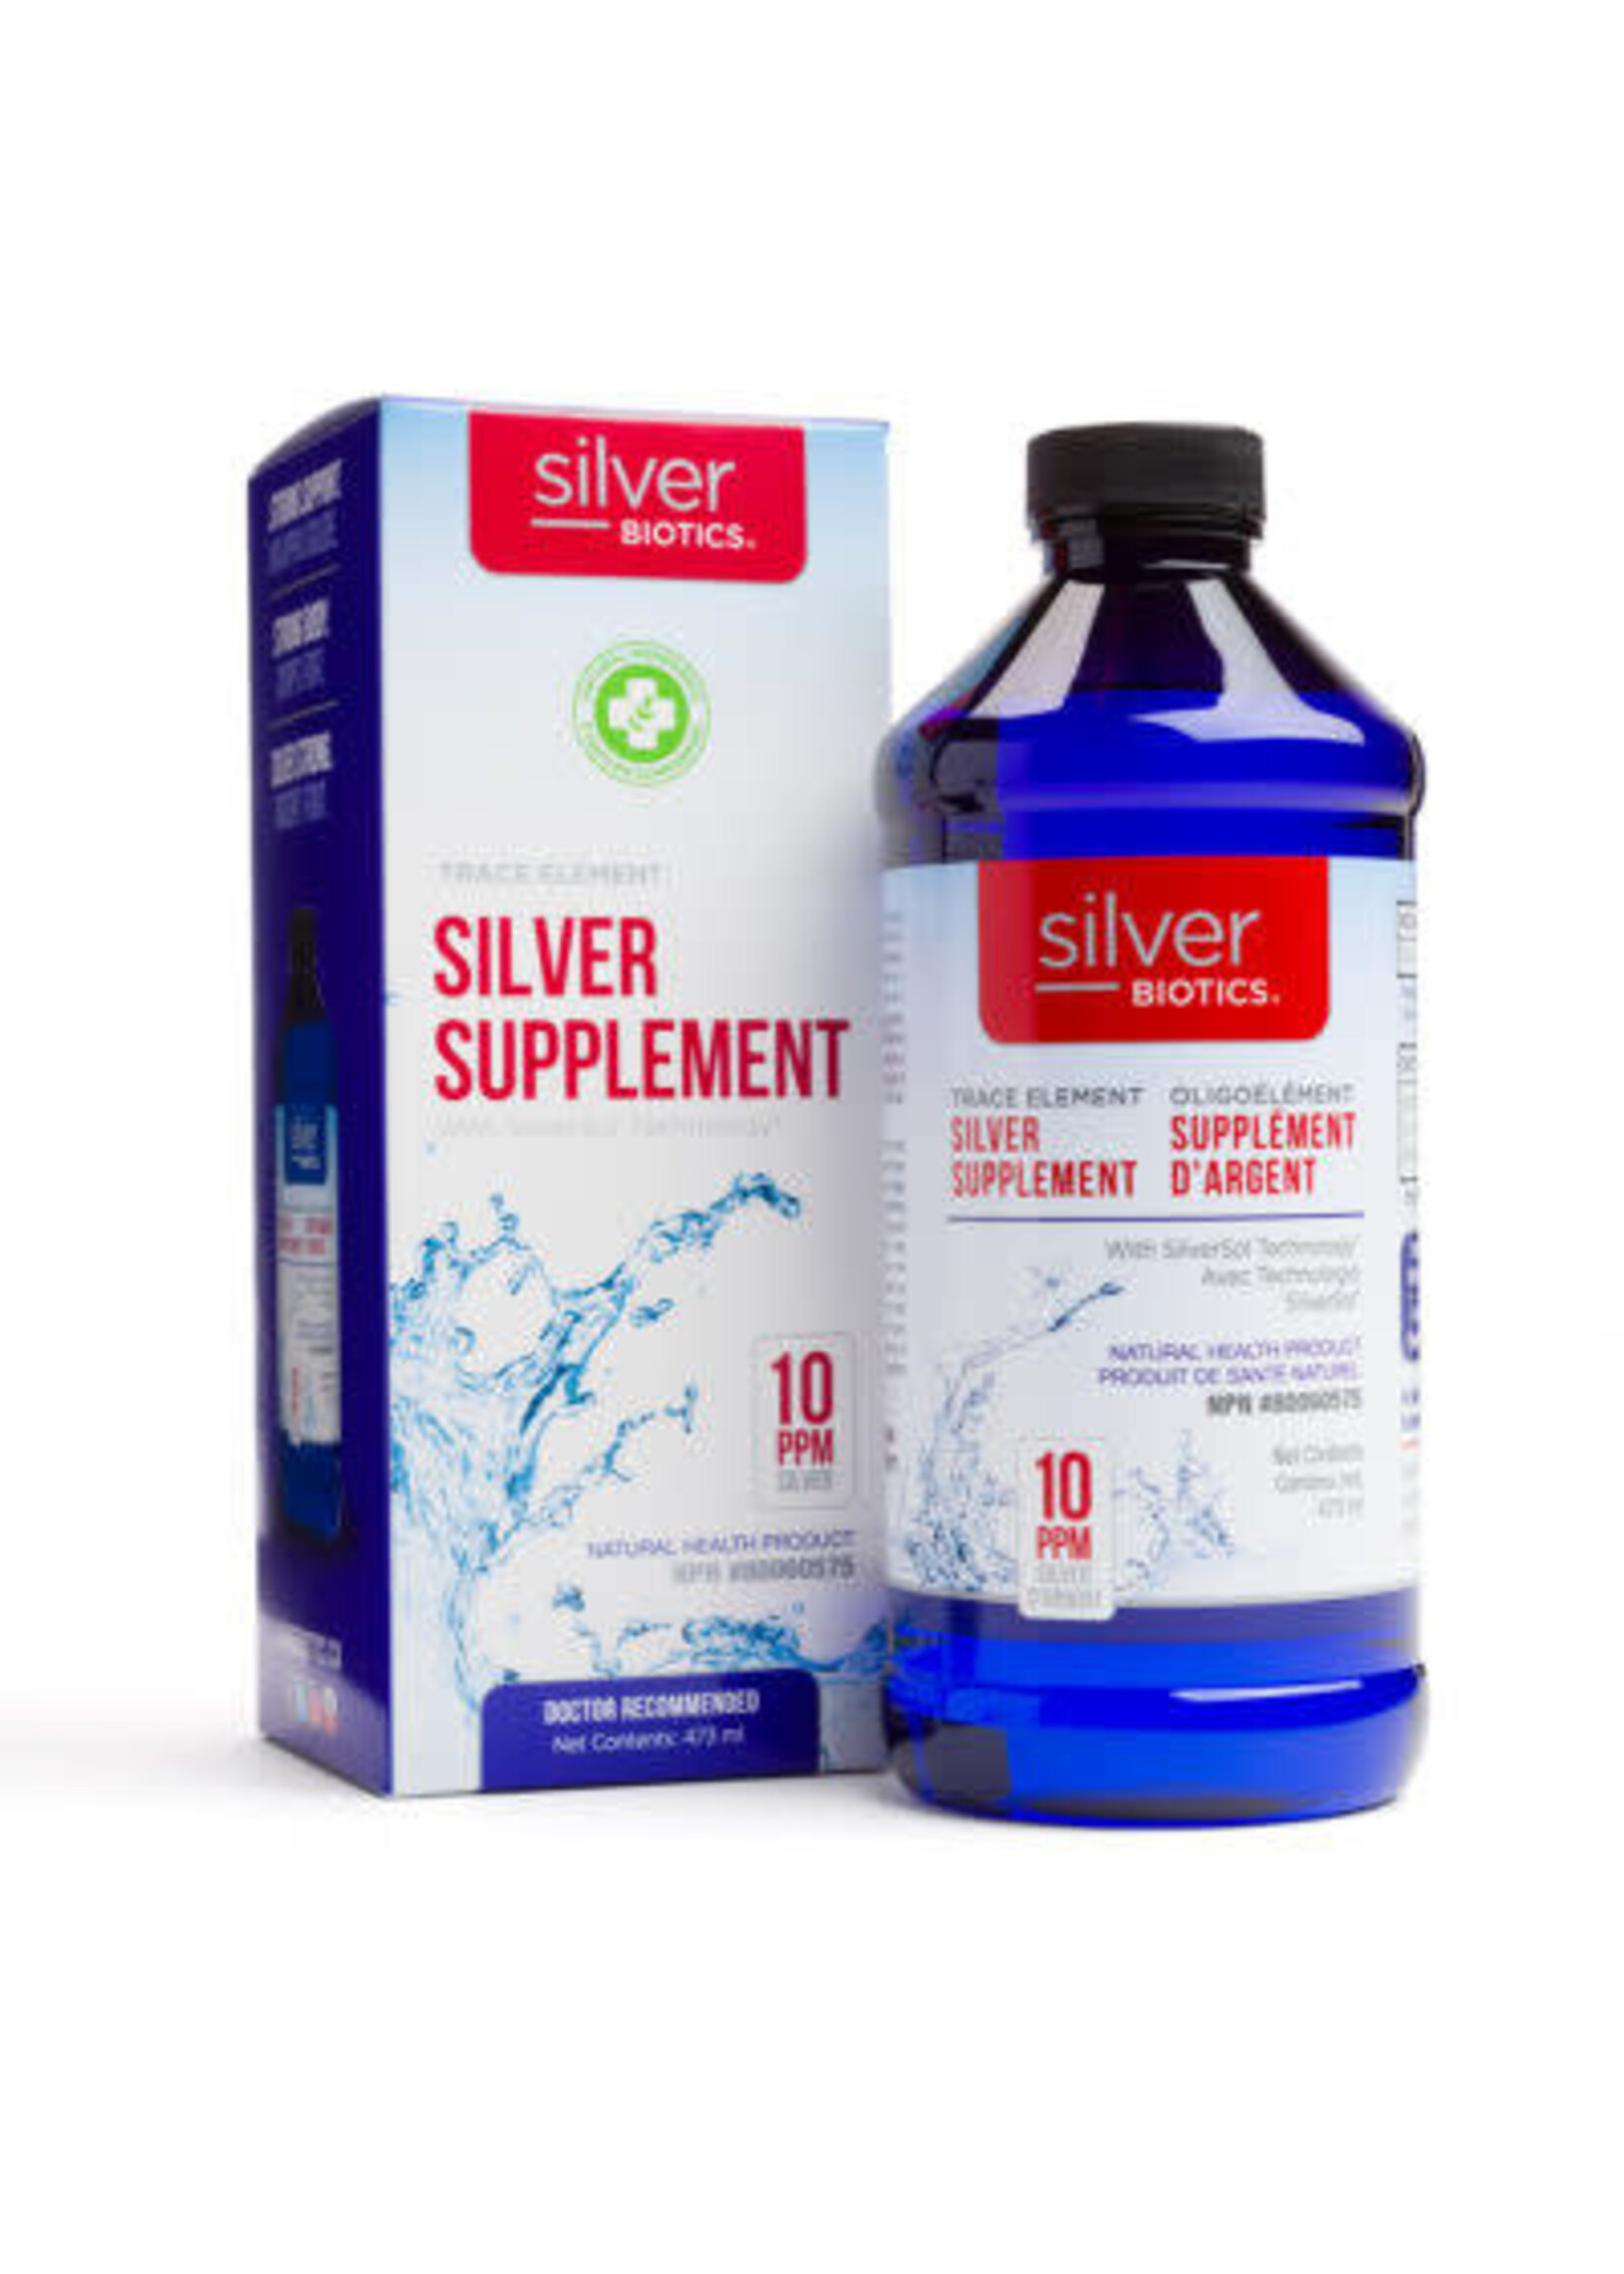 American Biotech Labs Silver Biotics Silver Supplement 10PPM